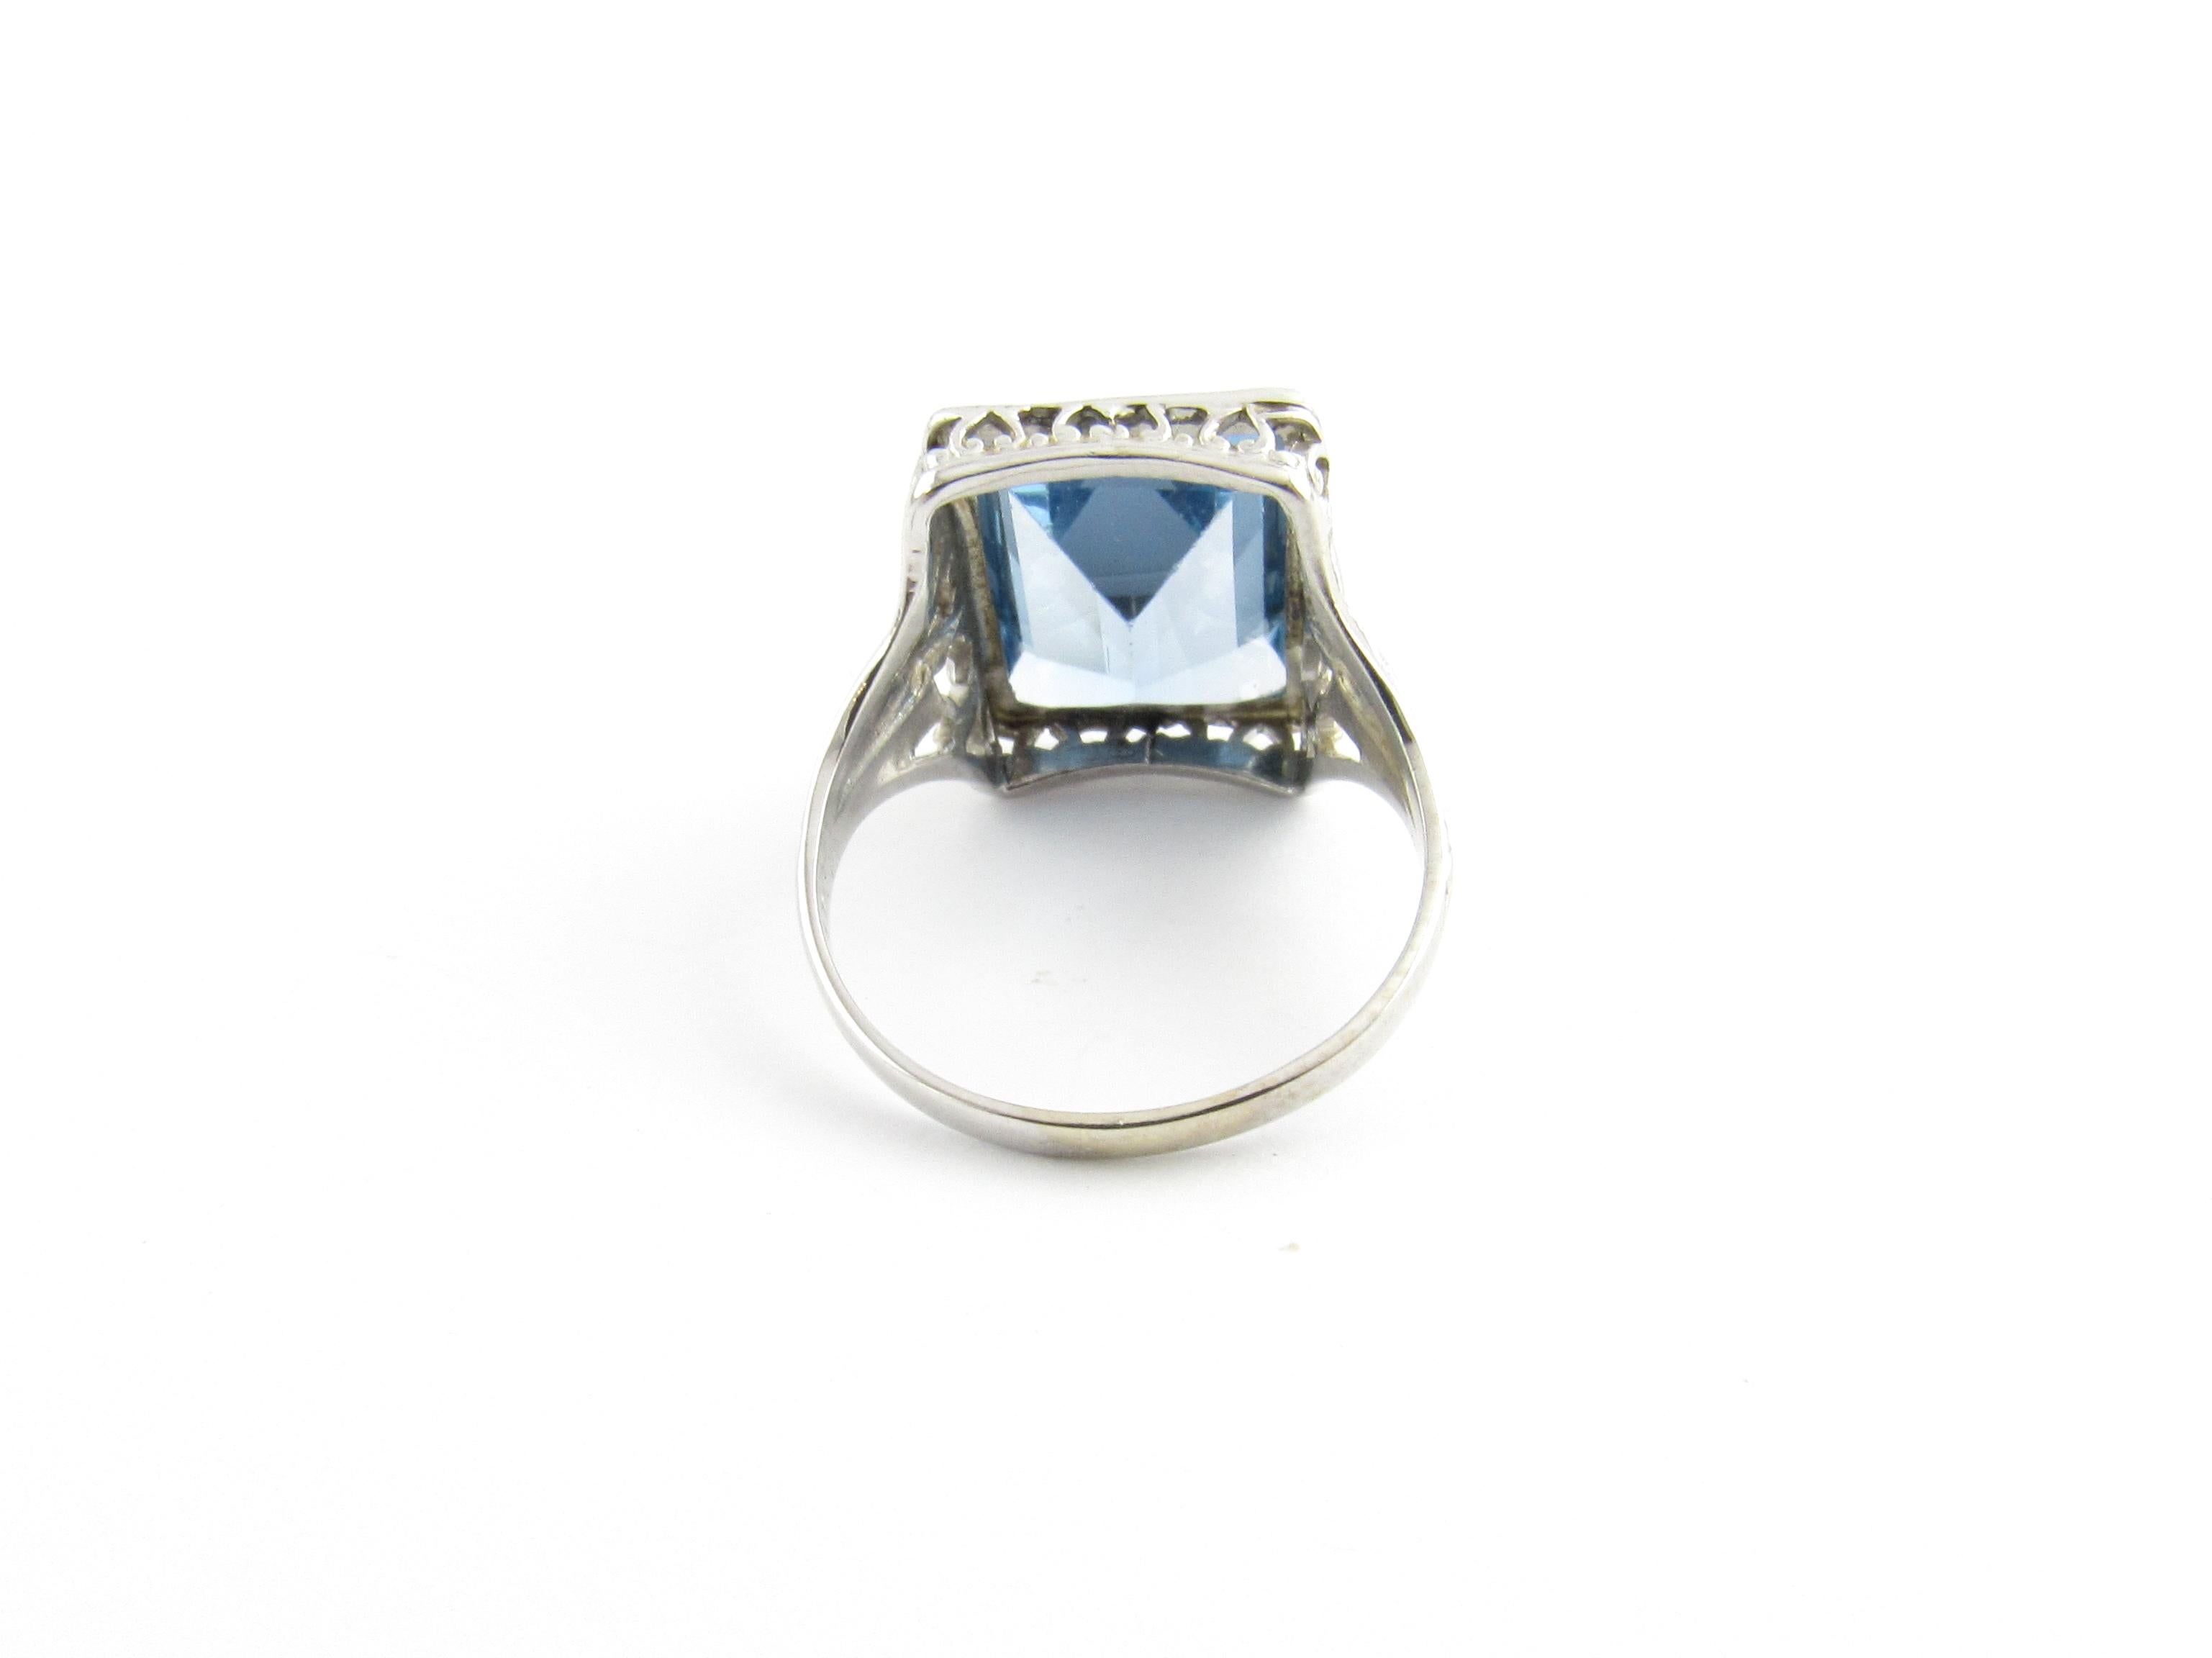 Emerald Cut 14 Karat White Gold and Simulated Blue Topaz Ring